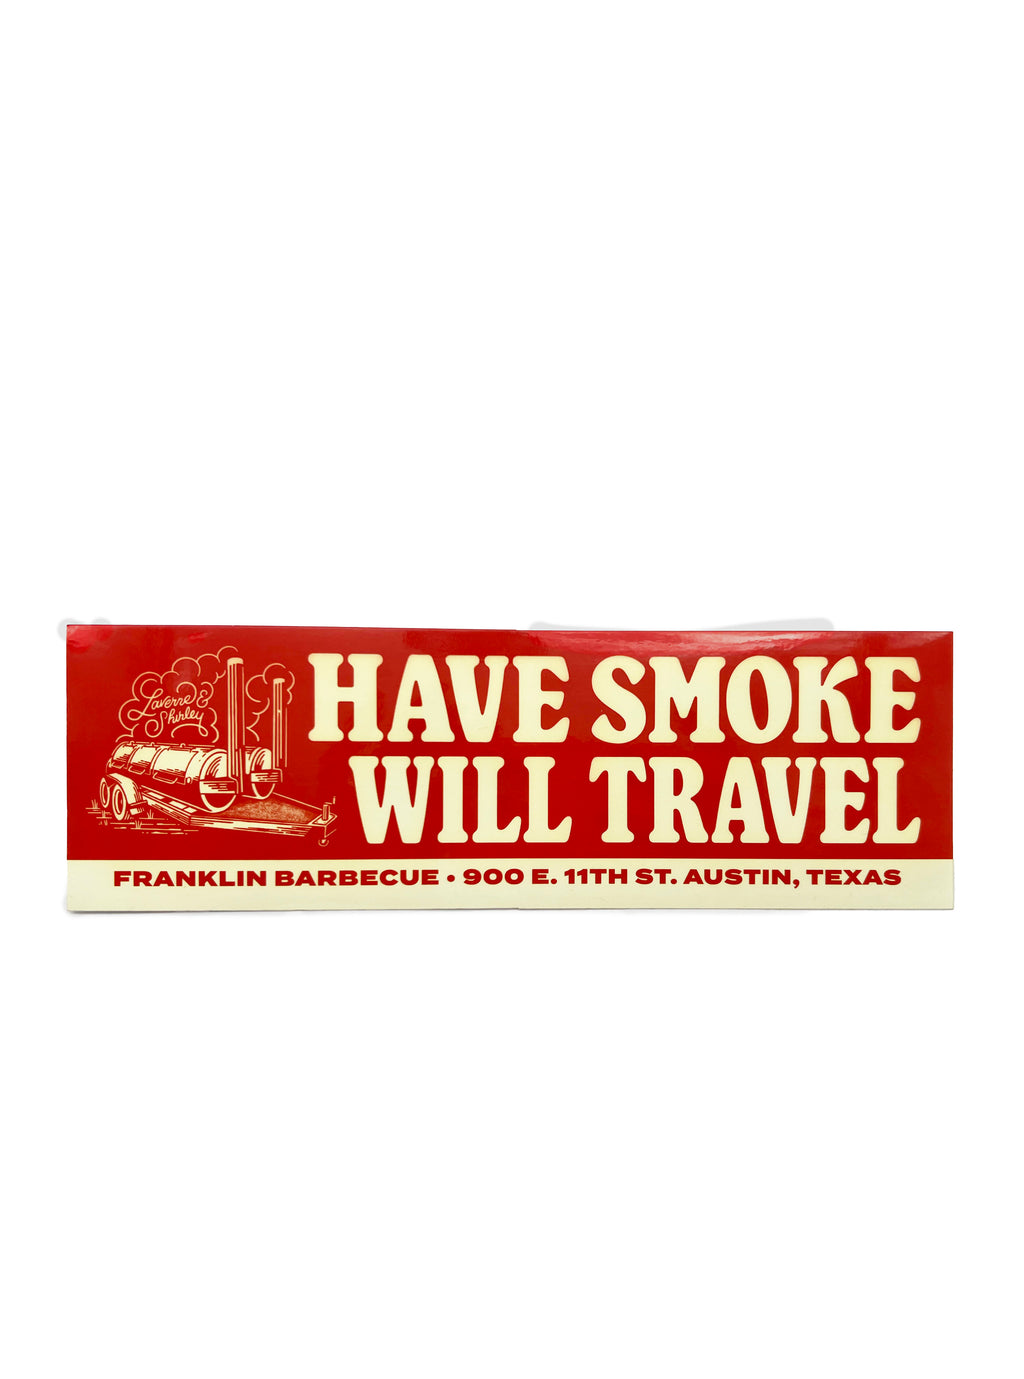 Red and cream colored bumper sticker that says in big letters "HAVE SMOKE WILL TRAVEL". To the left of the words is a drawing of  two barbecue smokers. Across the bottom of the sticker it says in smaller letters: "Franklin Barbecue. 900 E. 11th St. Austin, TX".